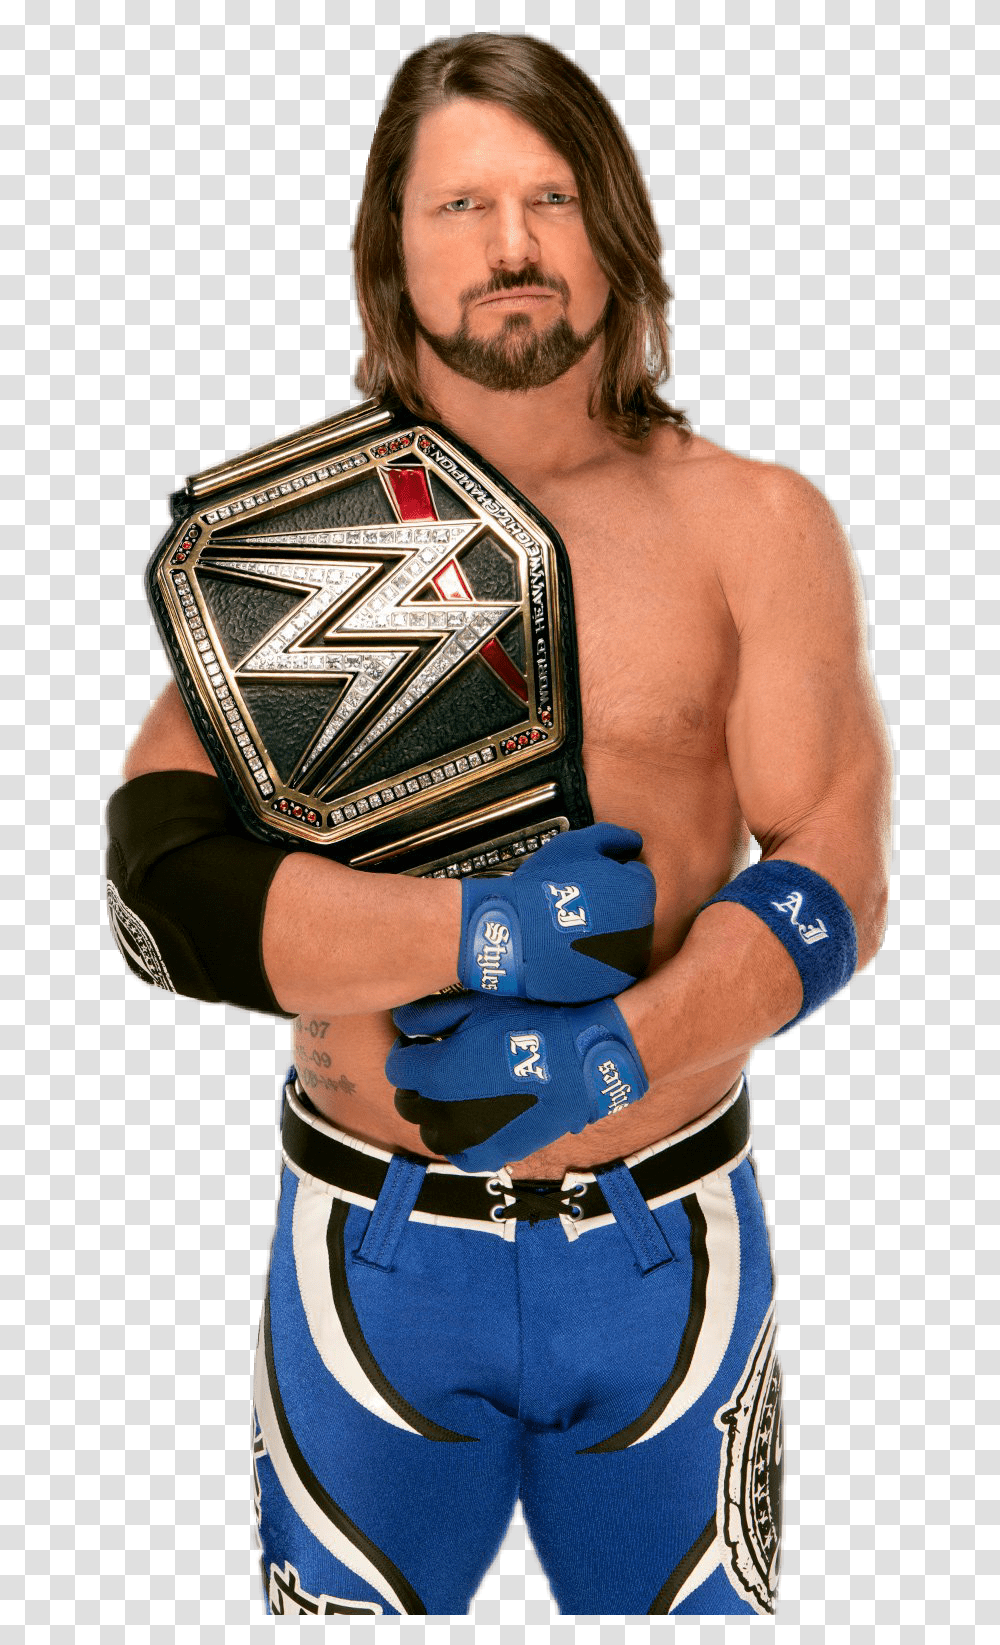 Ajstyles Wwe Styles Aj Champion Wrestling Wrestler Wwe Aj Styles Wwe Champion, Person, Skin, Sport Transparent Png